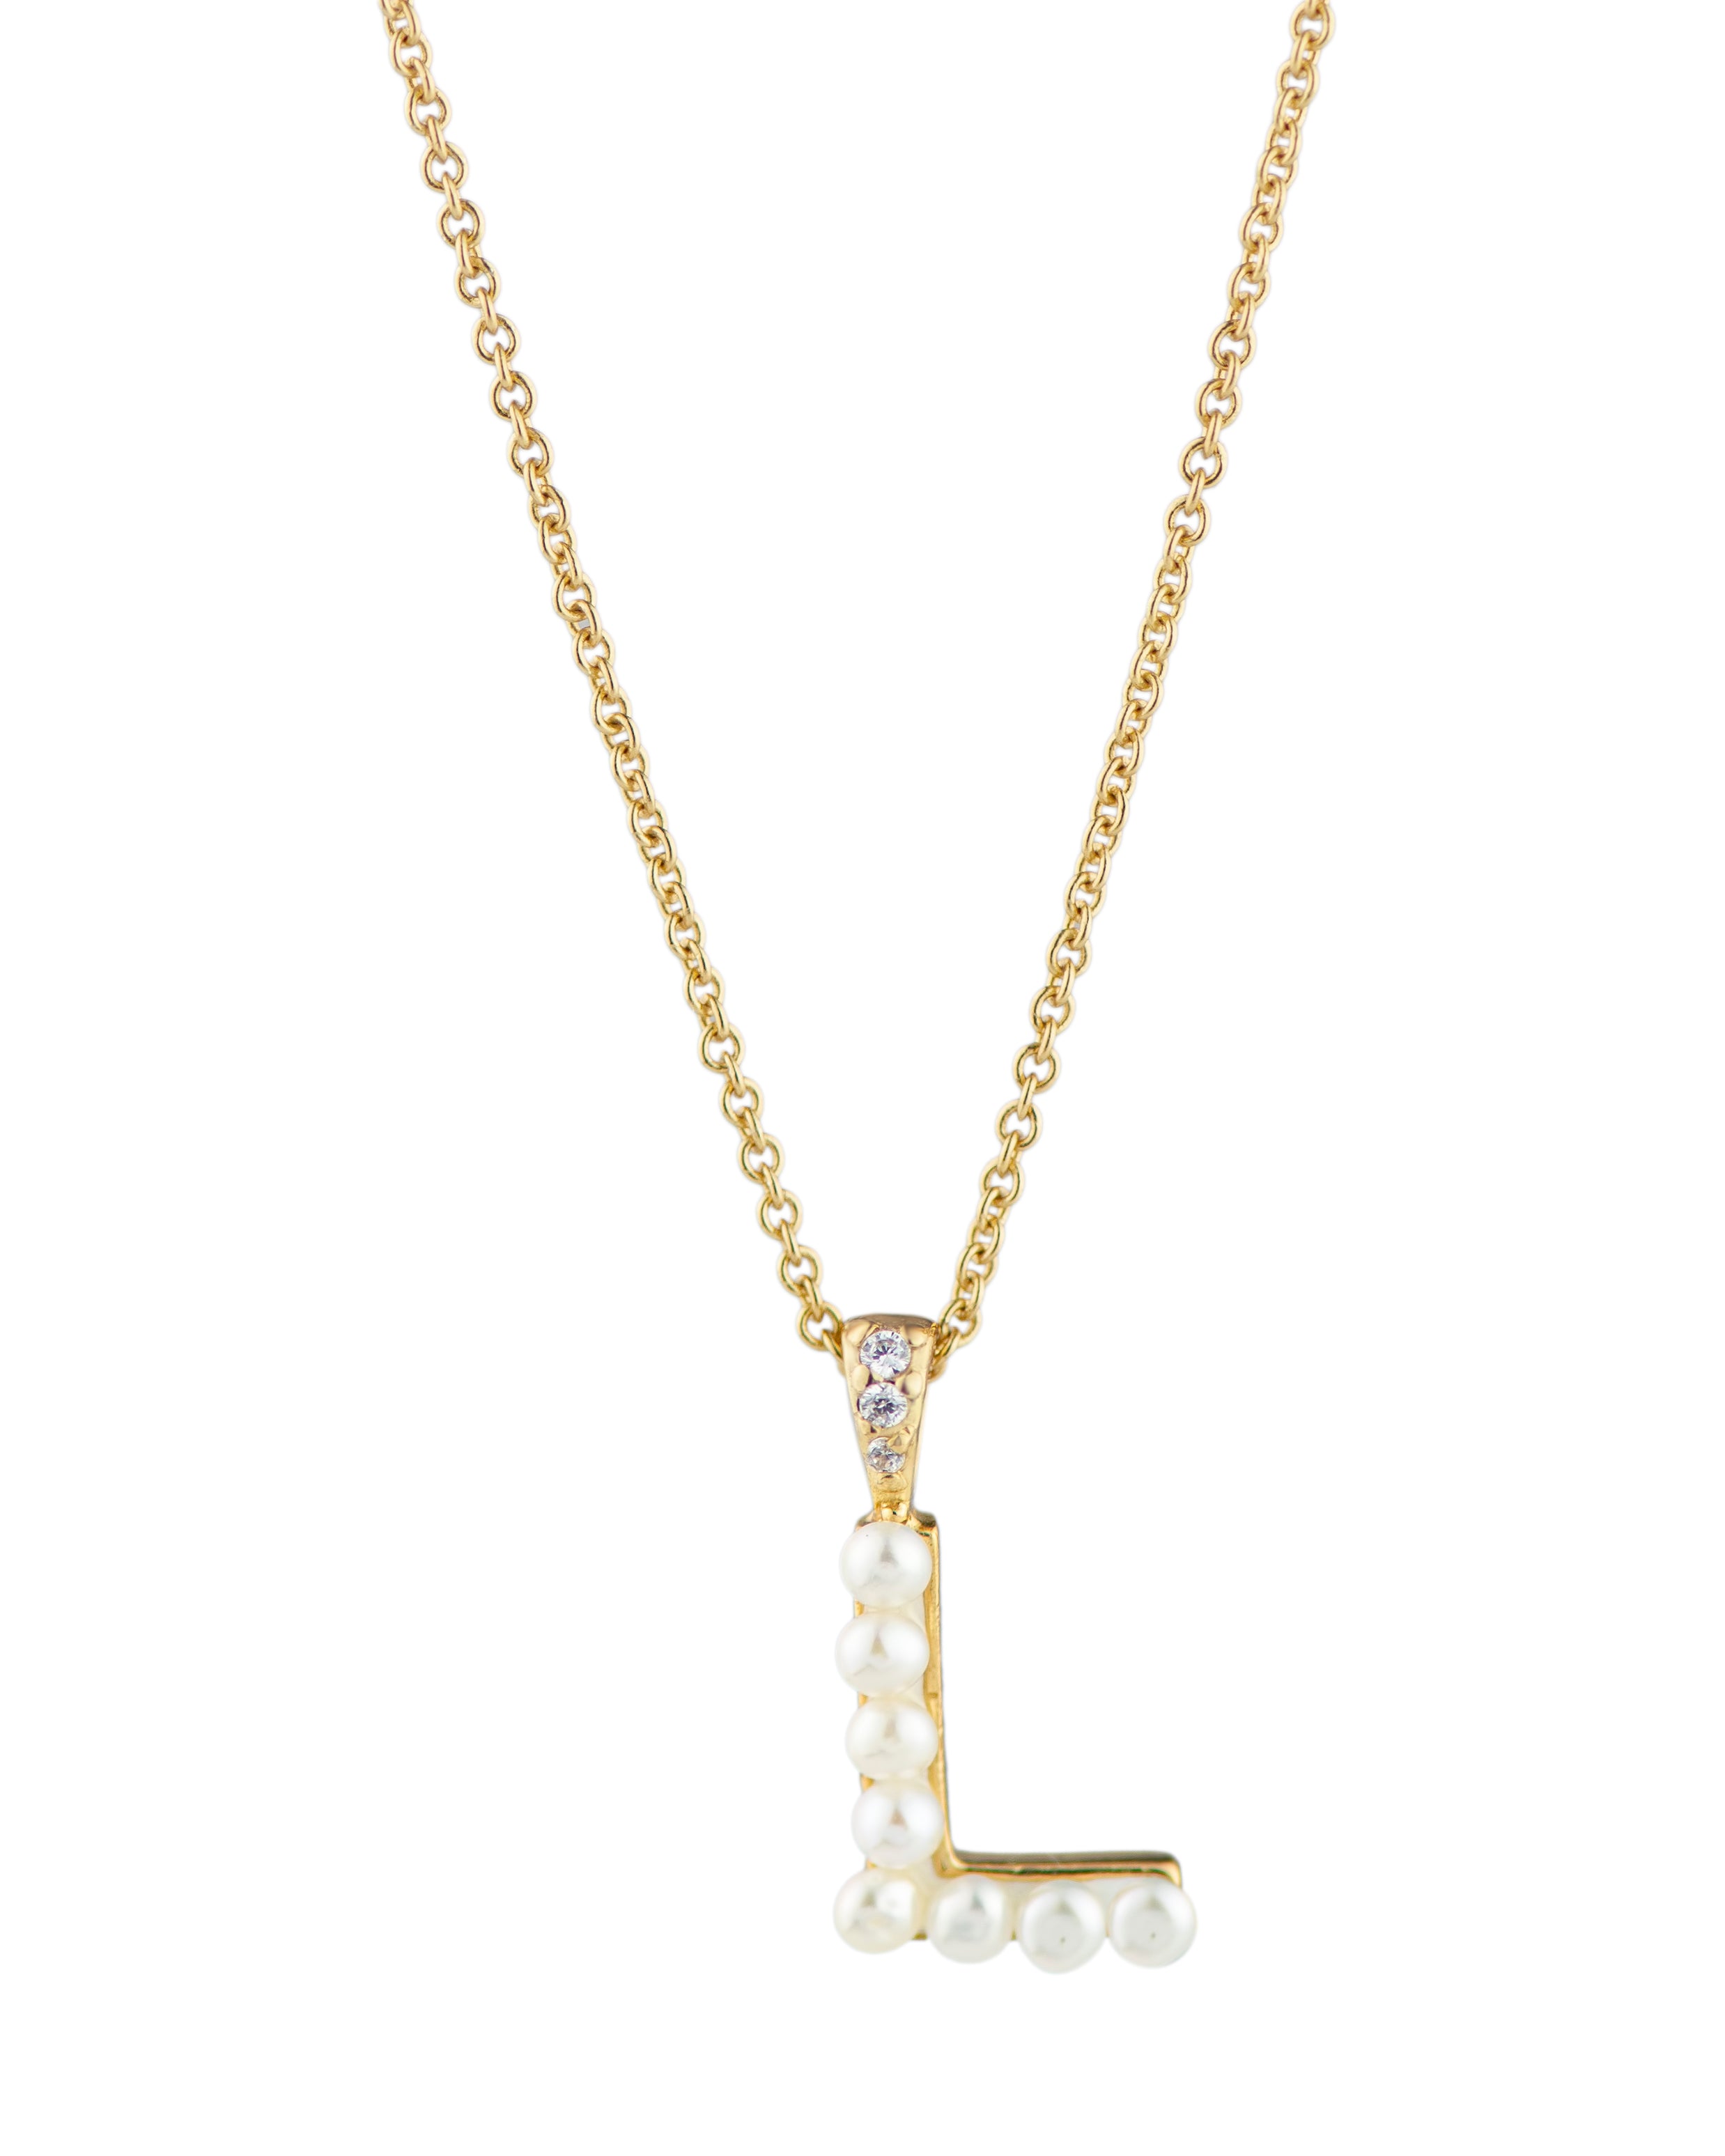 Freshwater Pearl Initial "L" Necklace